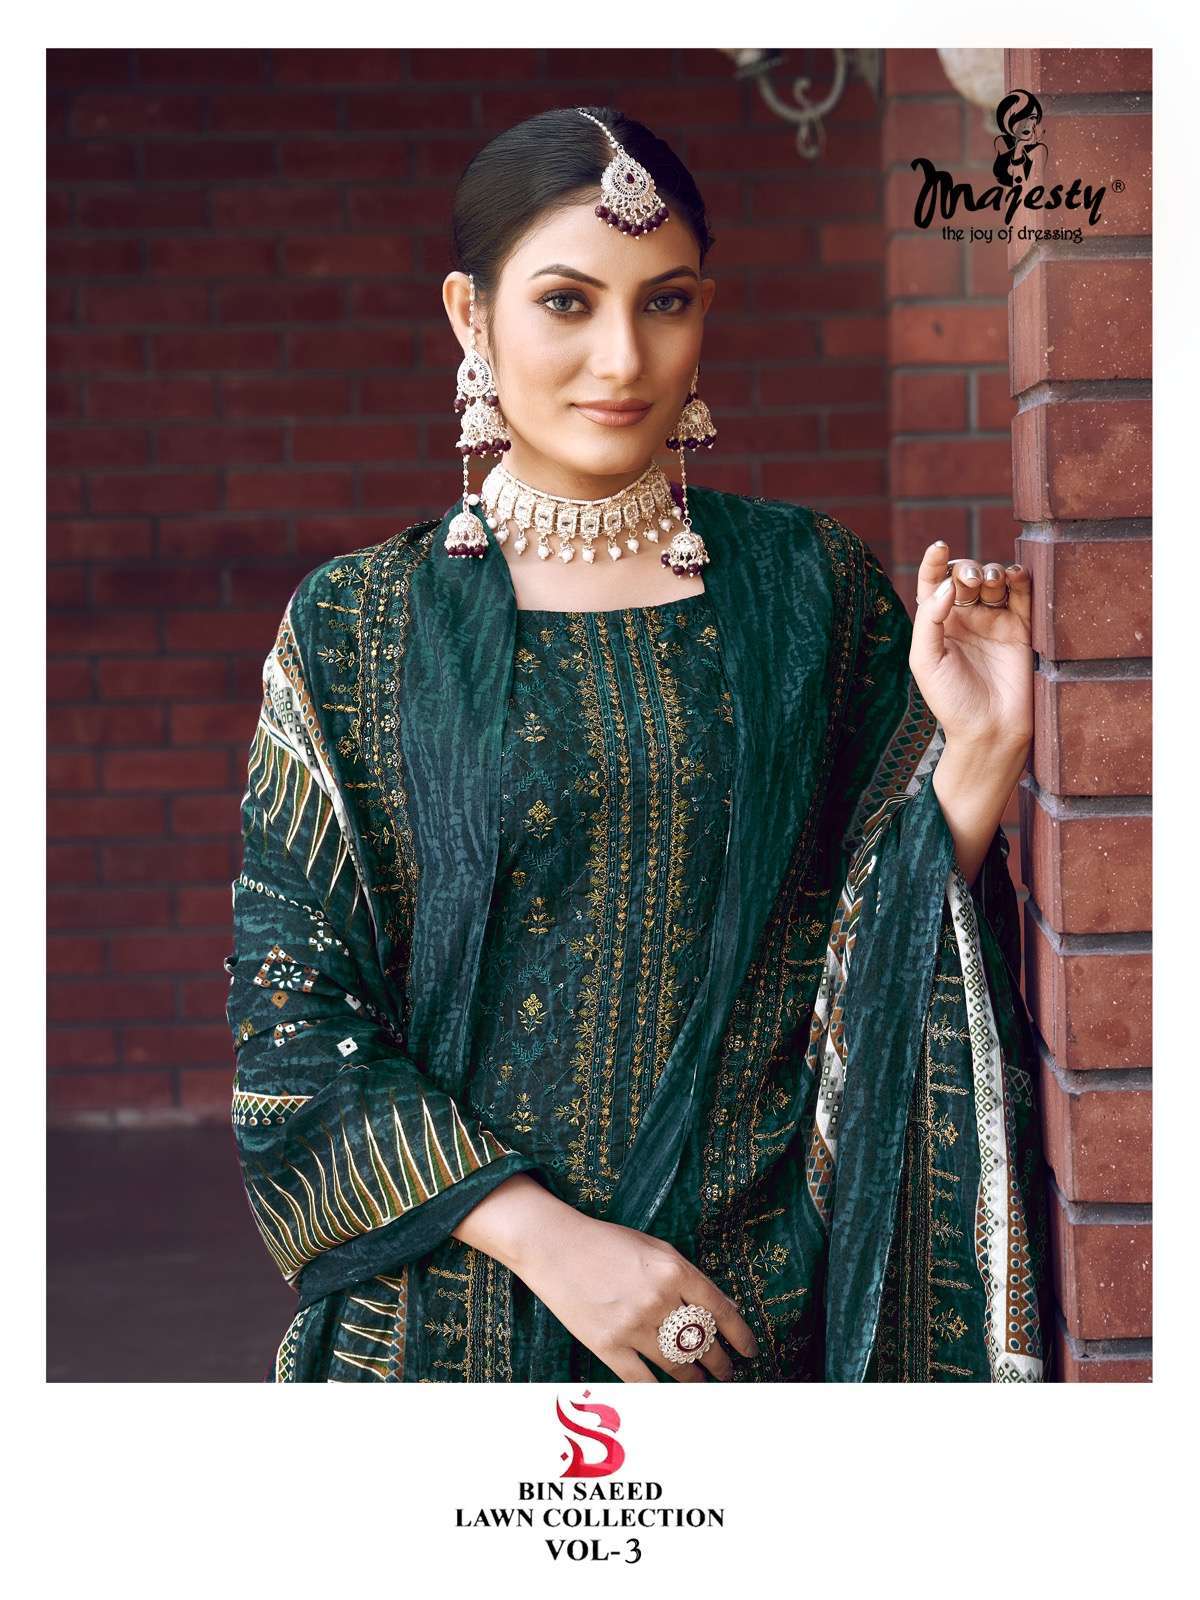 majesty bin saeed lawn collection vol 3 Pure cotton suit